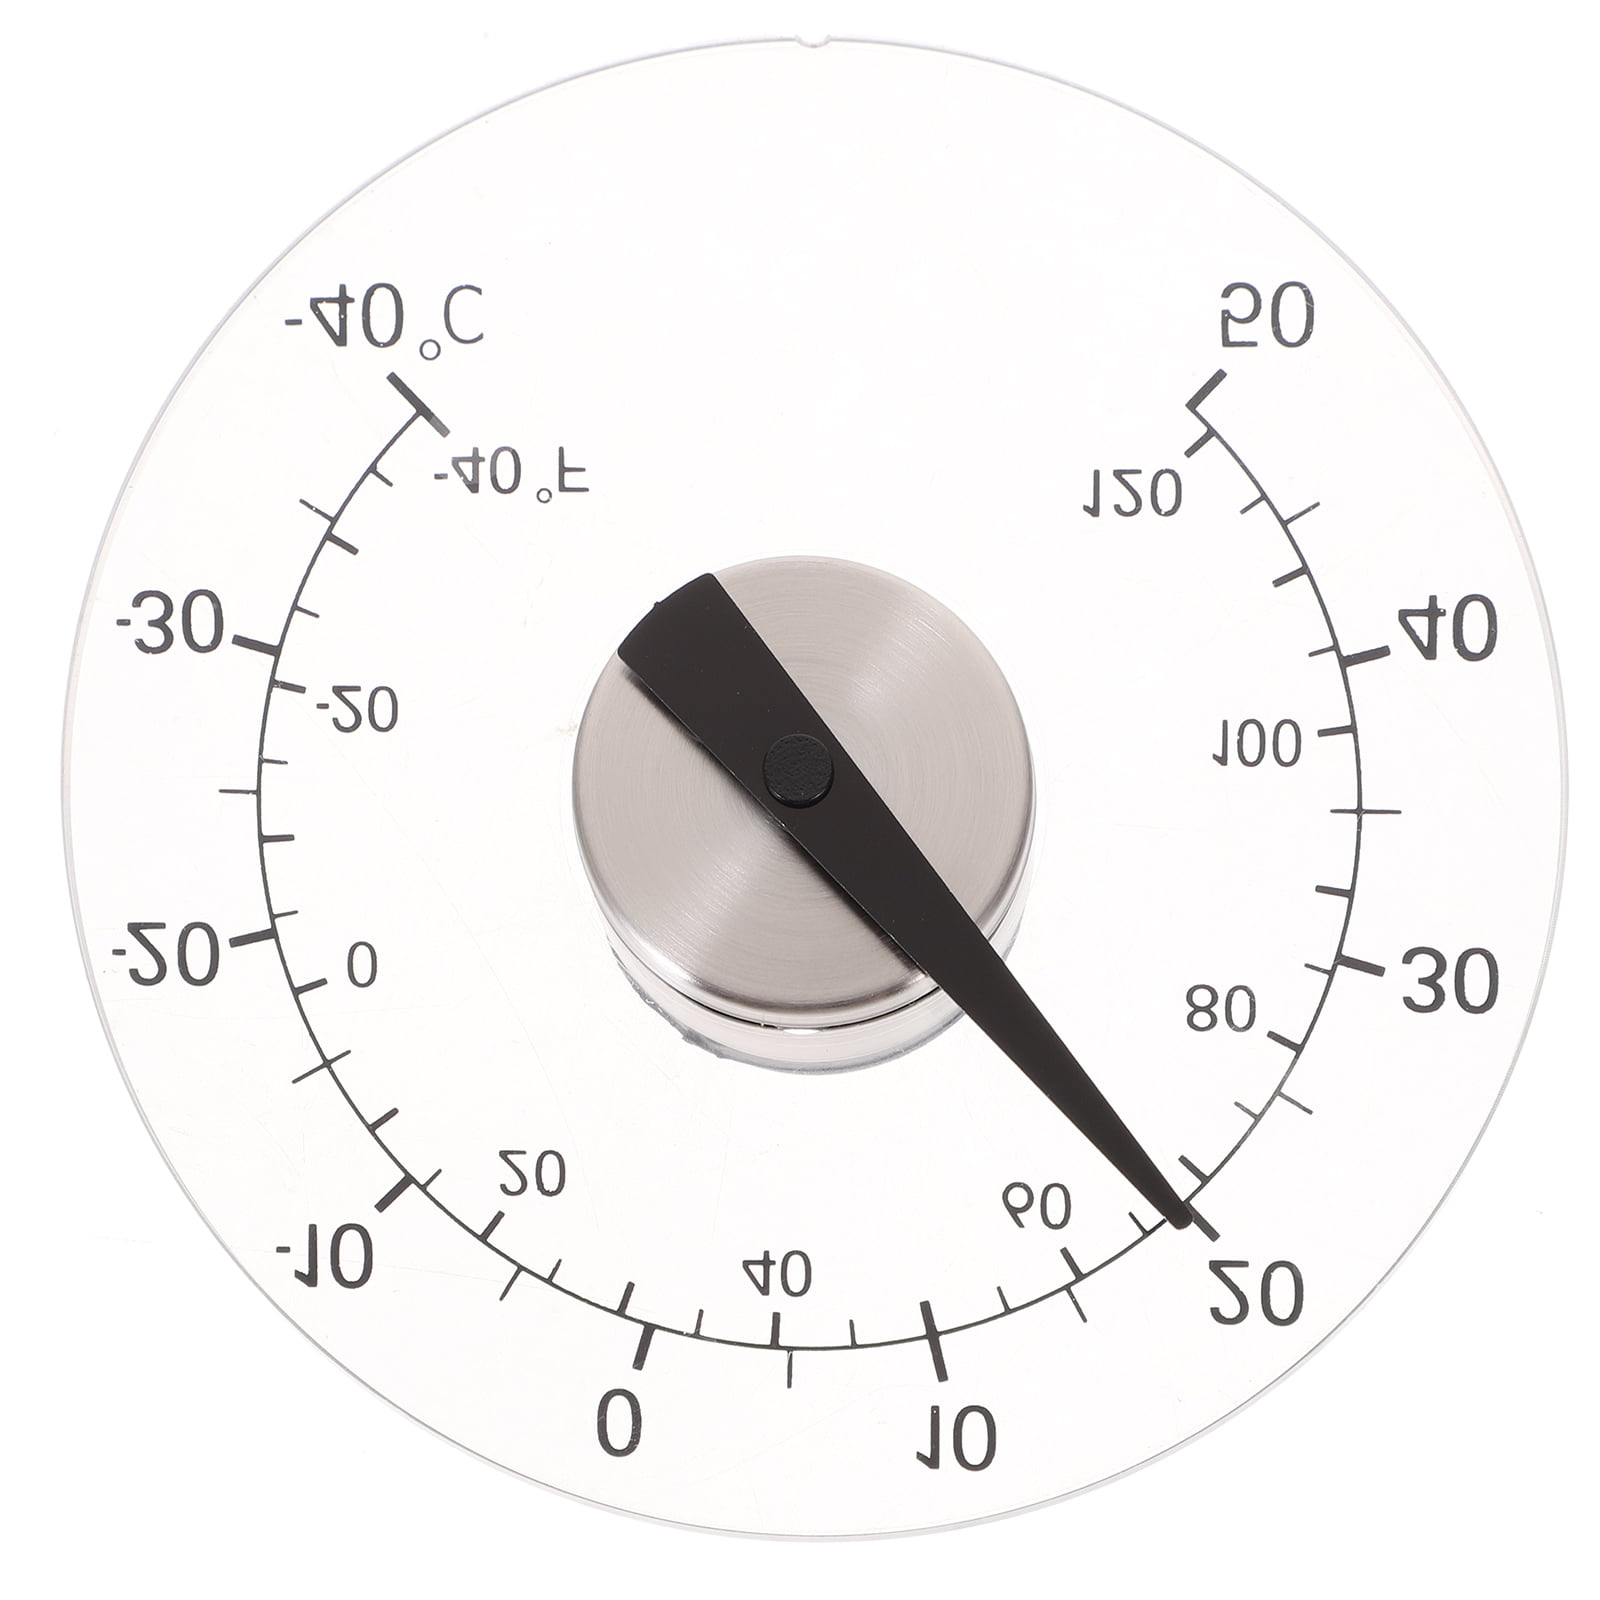  Window Stick Thermometer, Adhesive Transparent Dial Thermometer  Indoor Outdoor Wall No Battery Needed Waterproof Accurate Readings Gauge  for Home Office Patio Pool Yard and Garden Glass Fixing : Patio, Lawn 